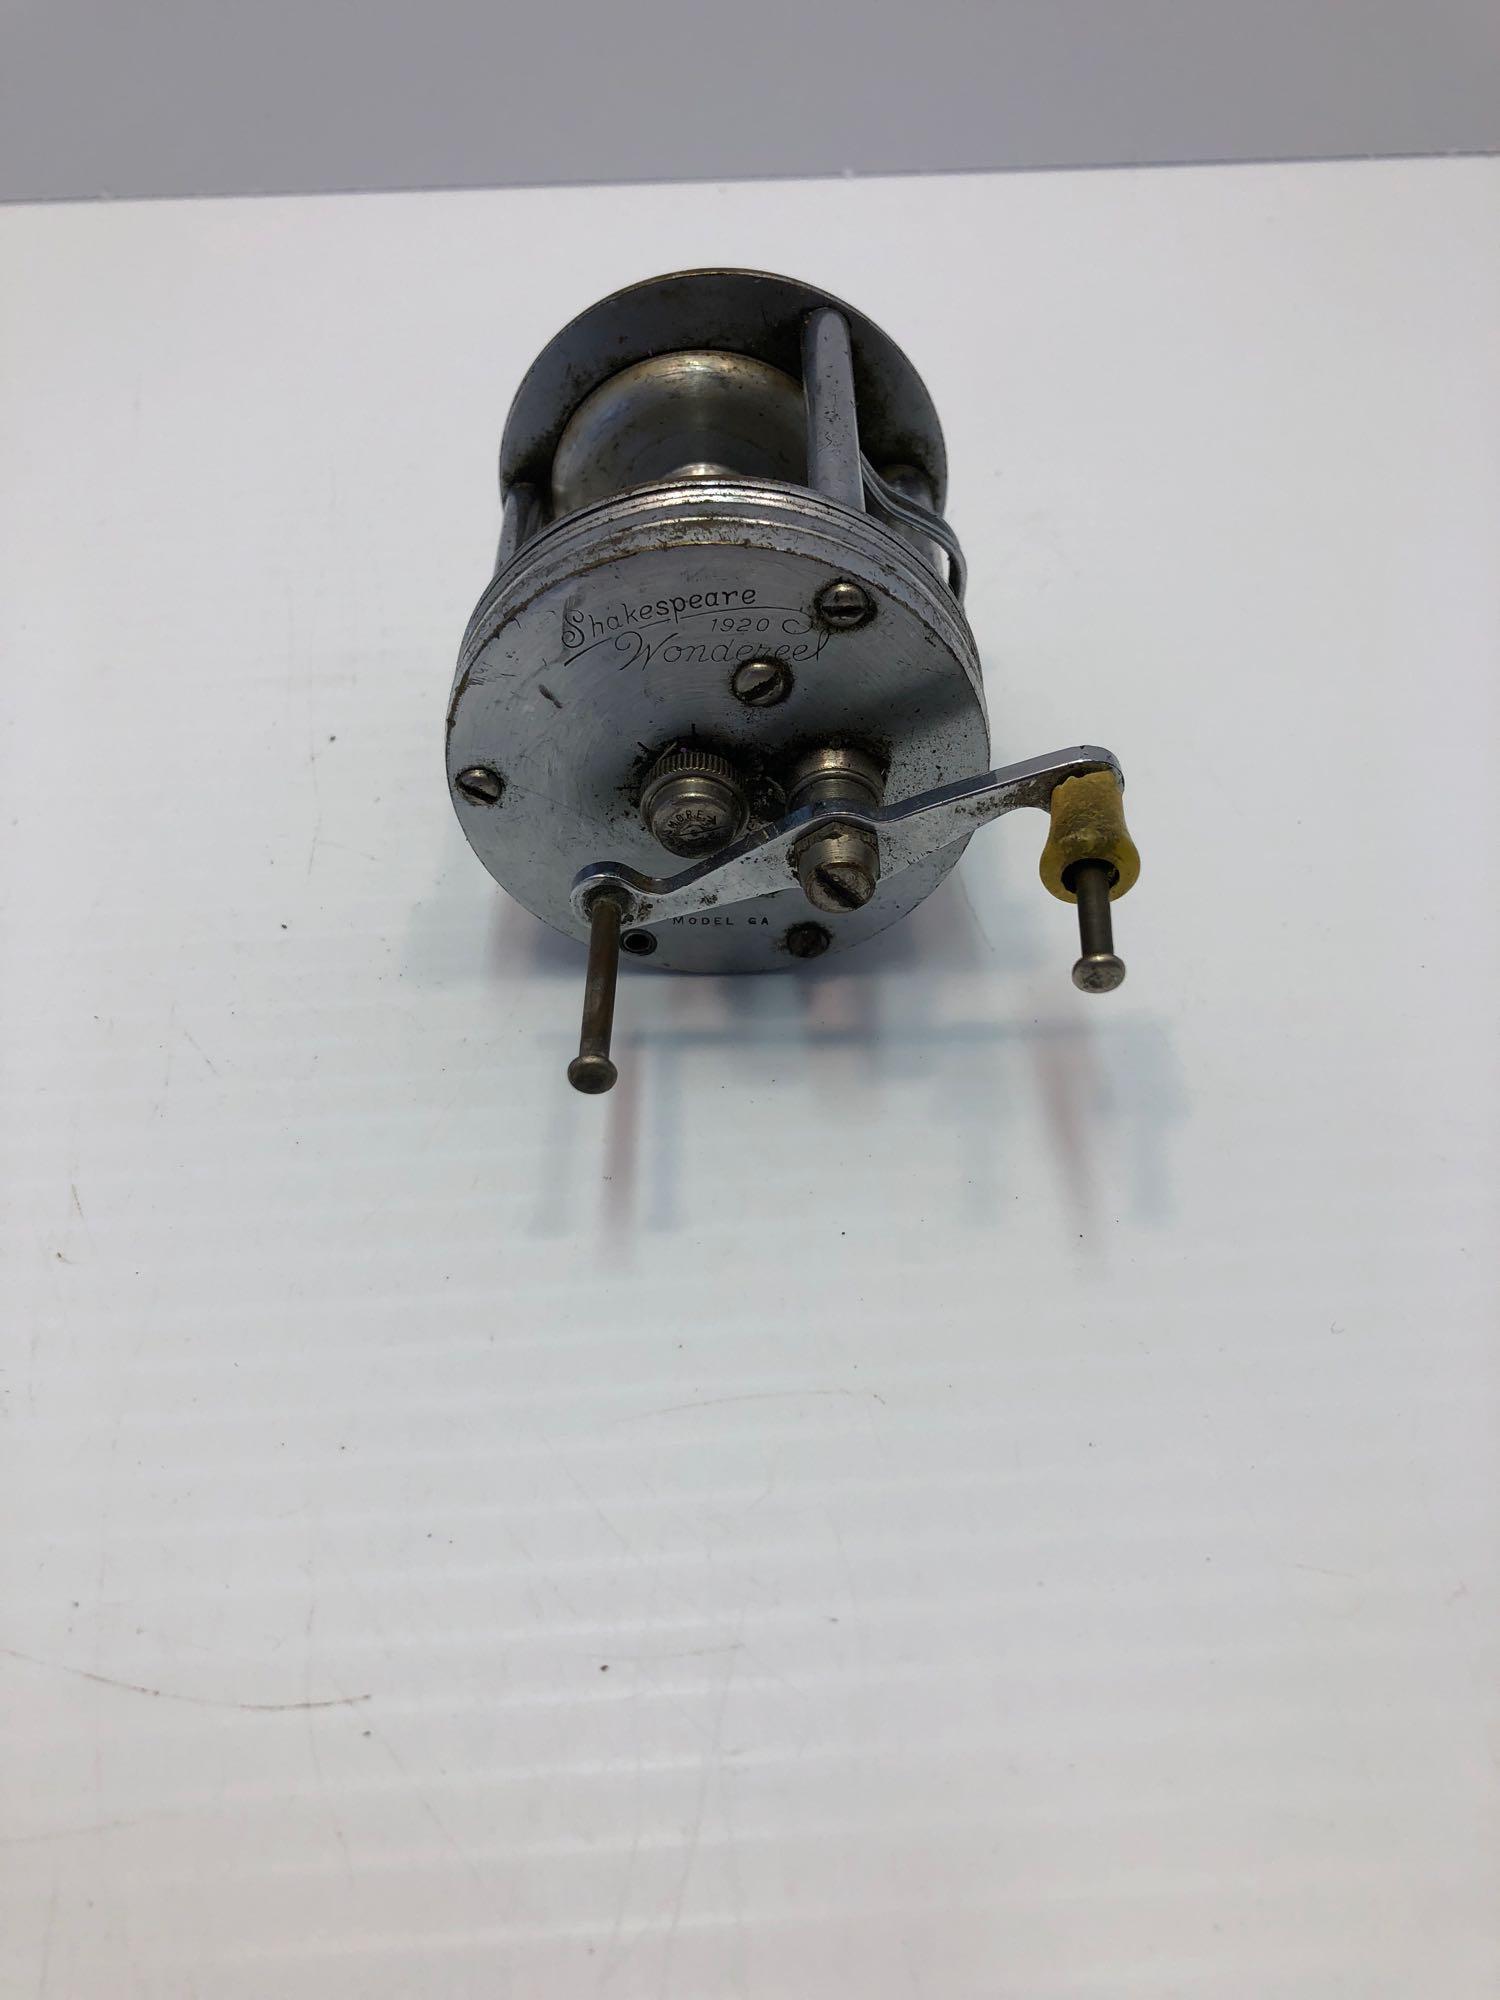 Sold at Auction: SHAKESPEARE BWS 700 SPIN REEL W/ 7' 6 ROD